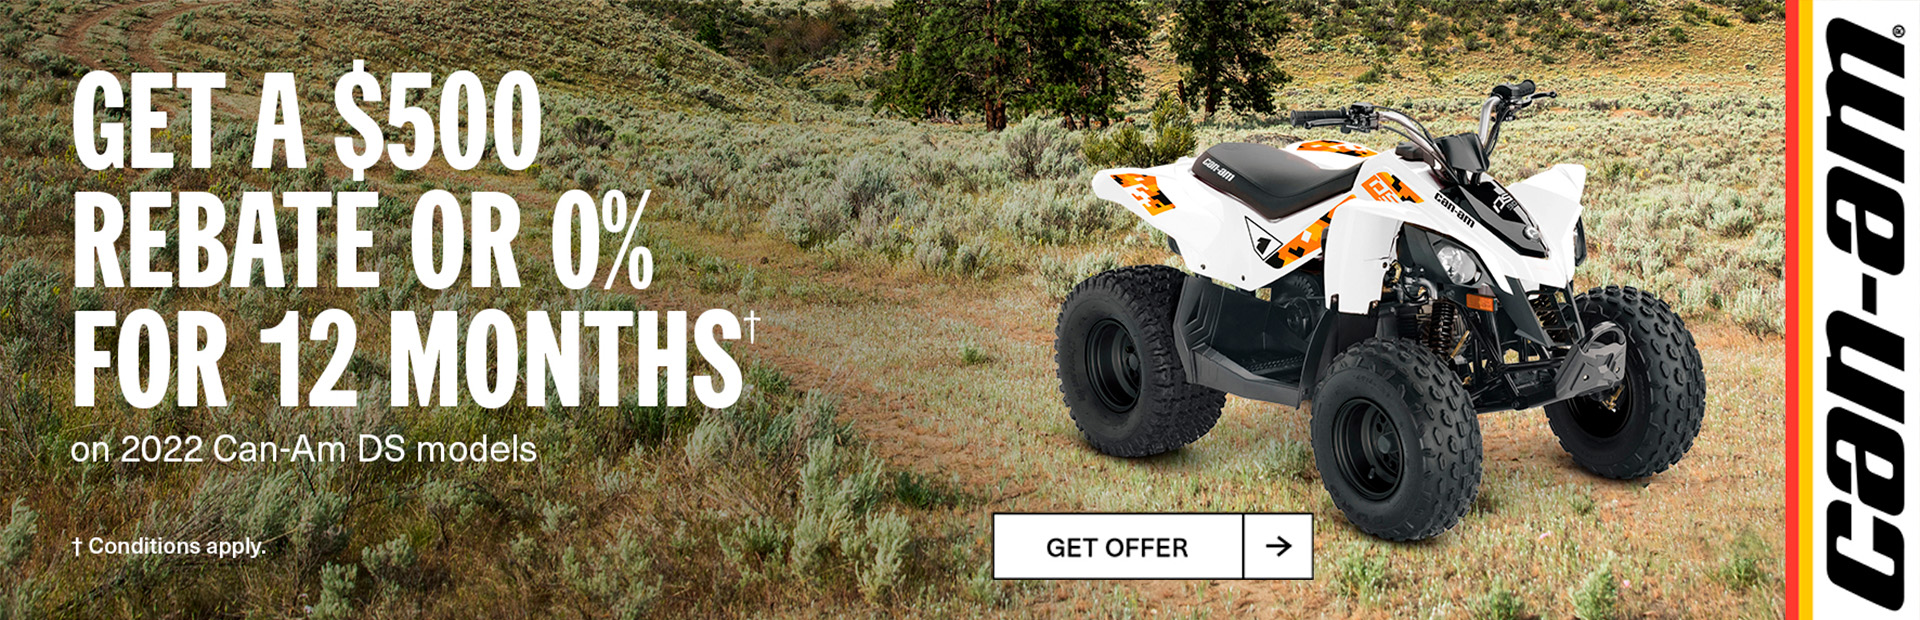 Can am Off Road - Retail Promotion at Midland Powersports